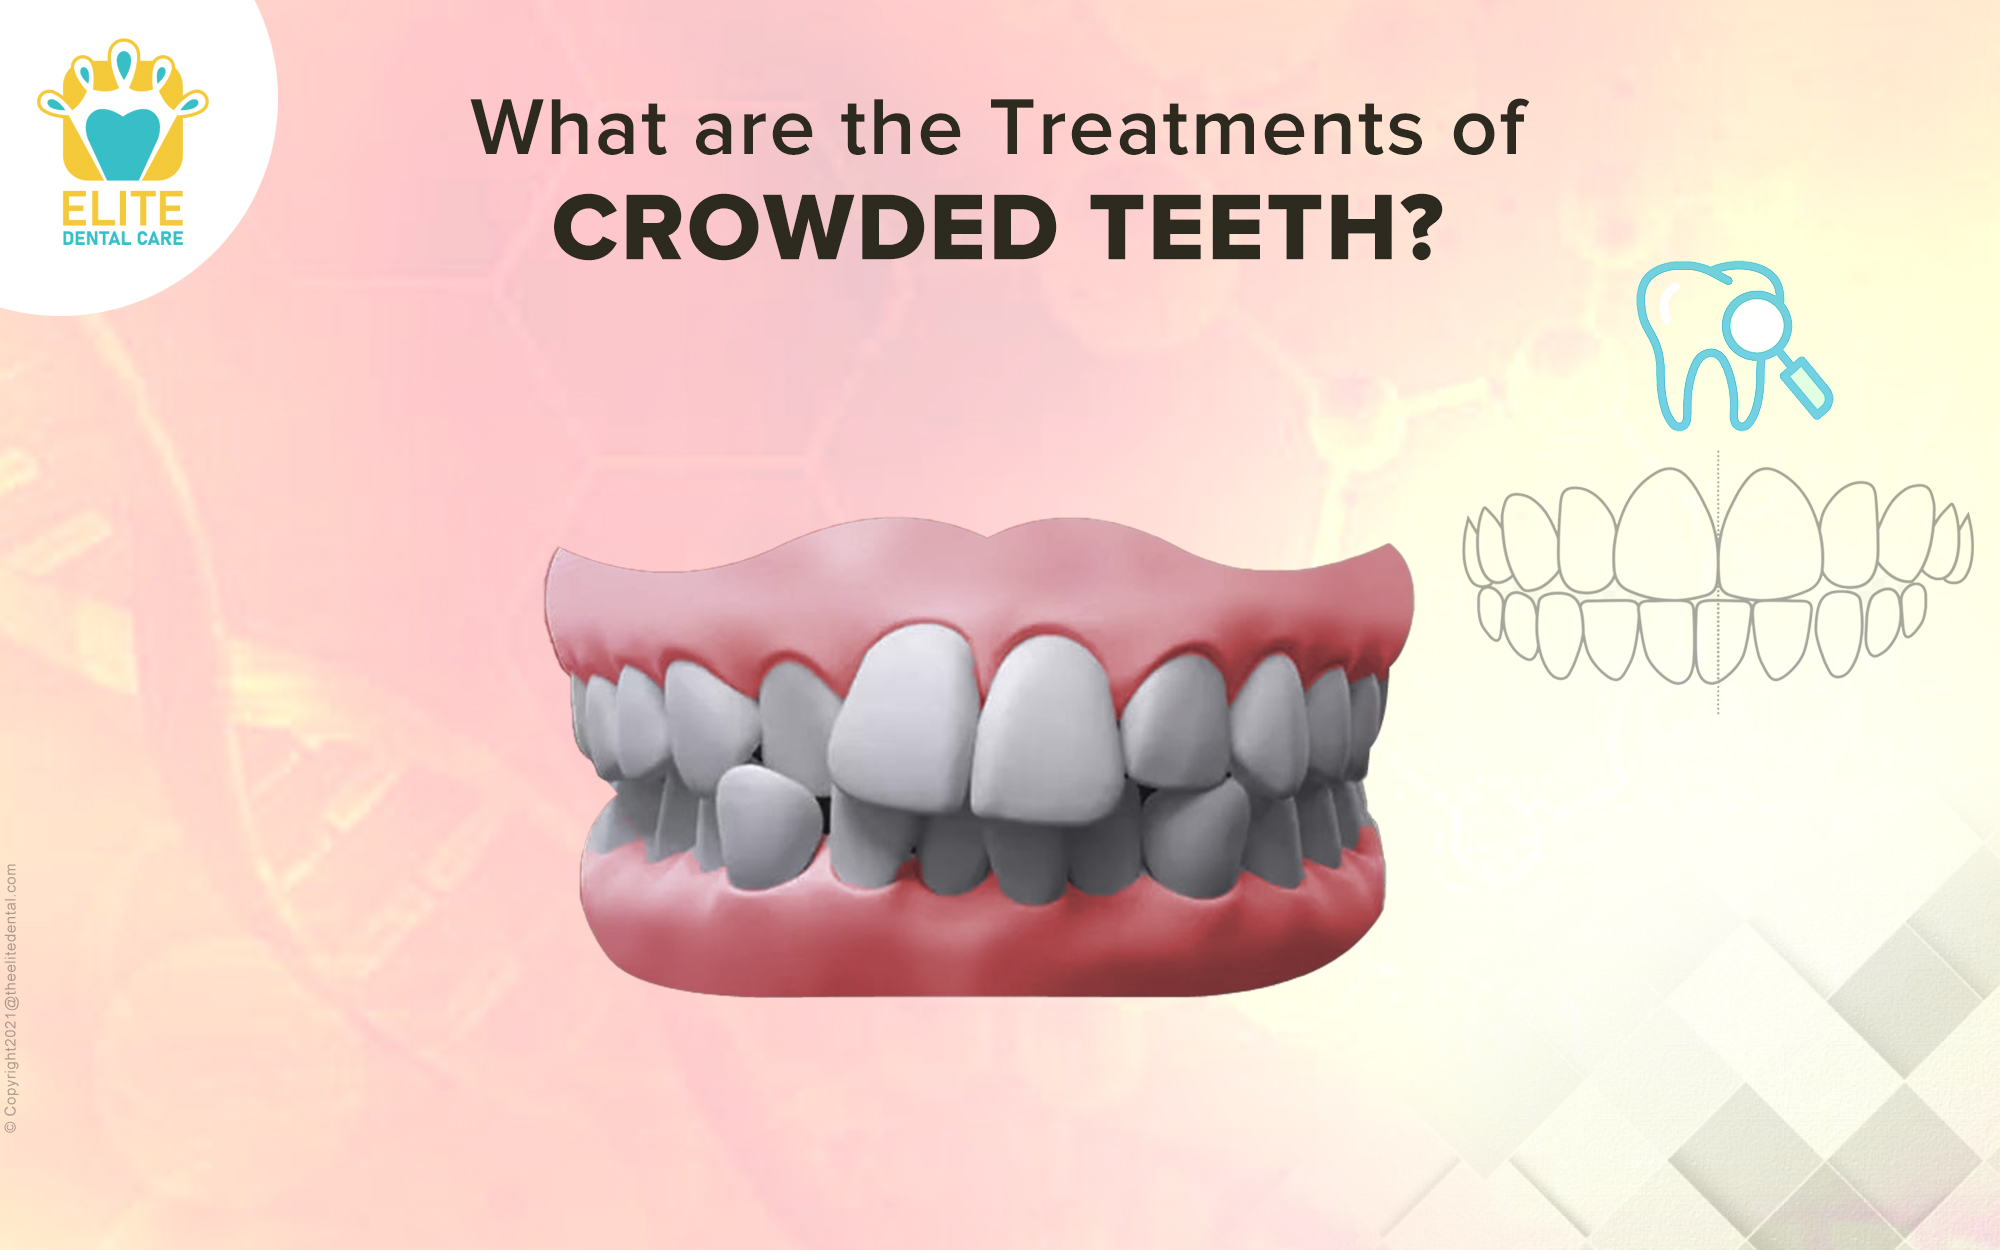 What are the Treatments for Crowded Teeth?